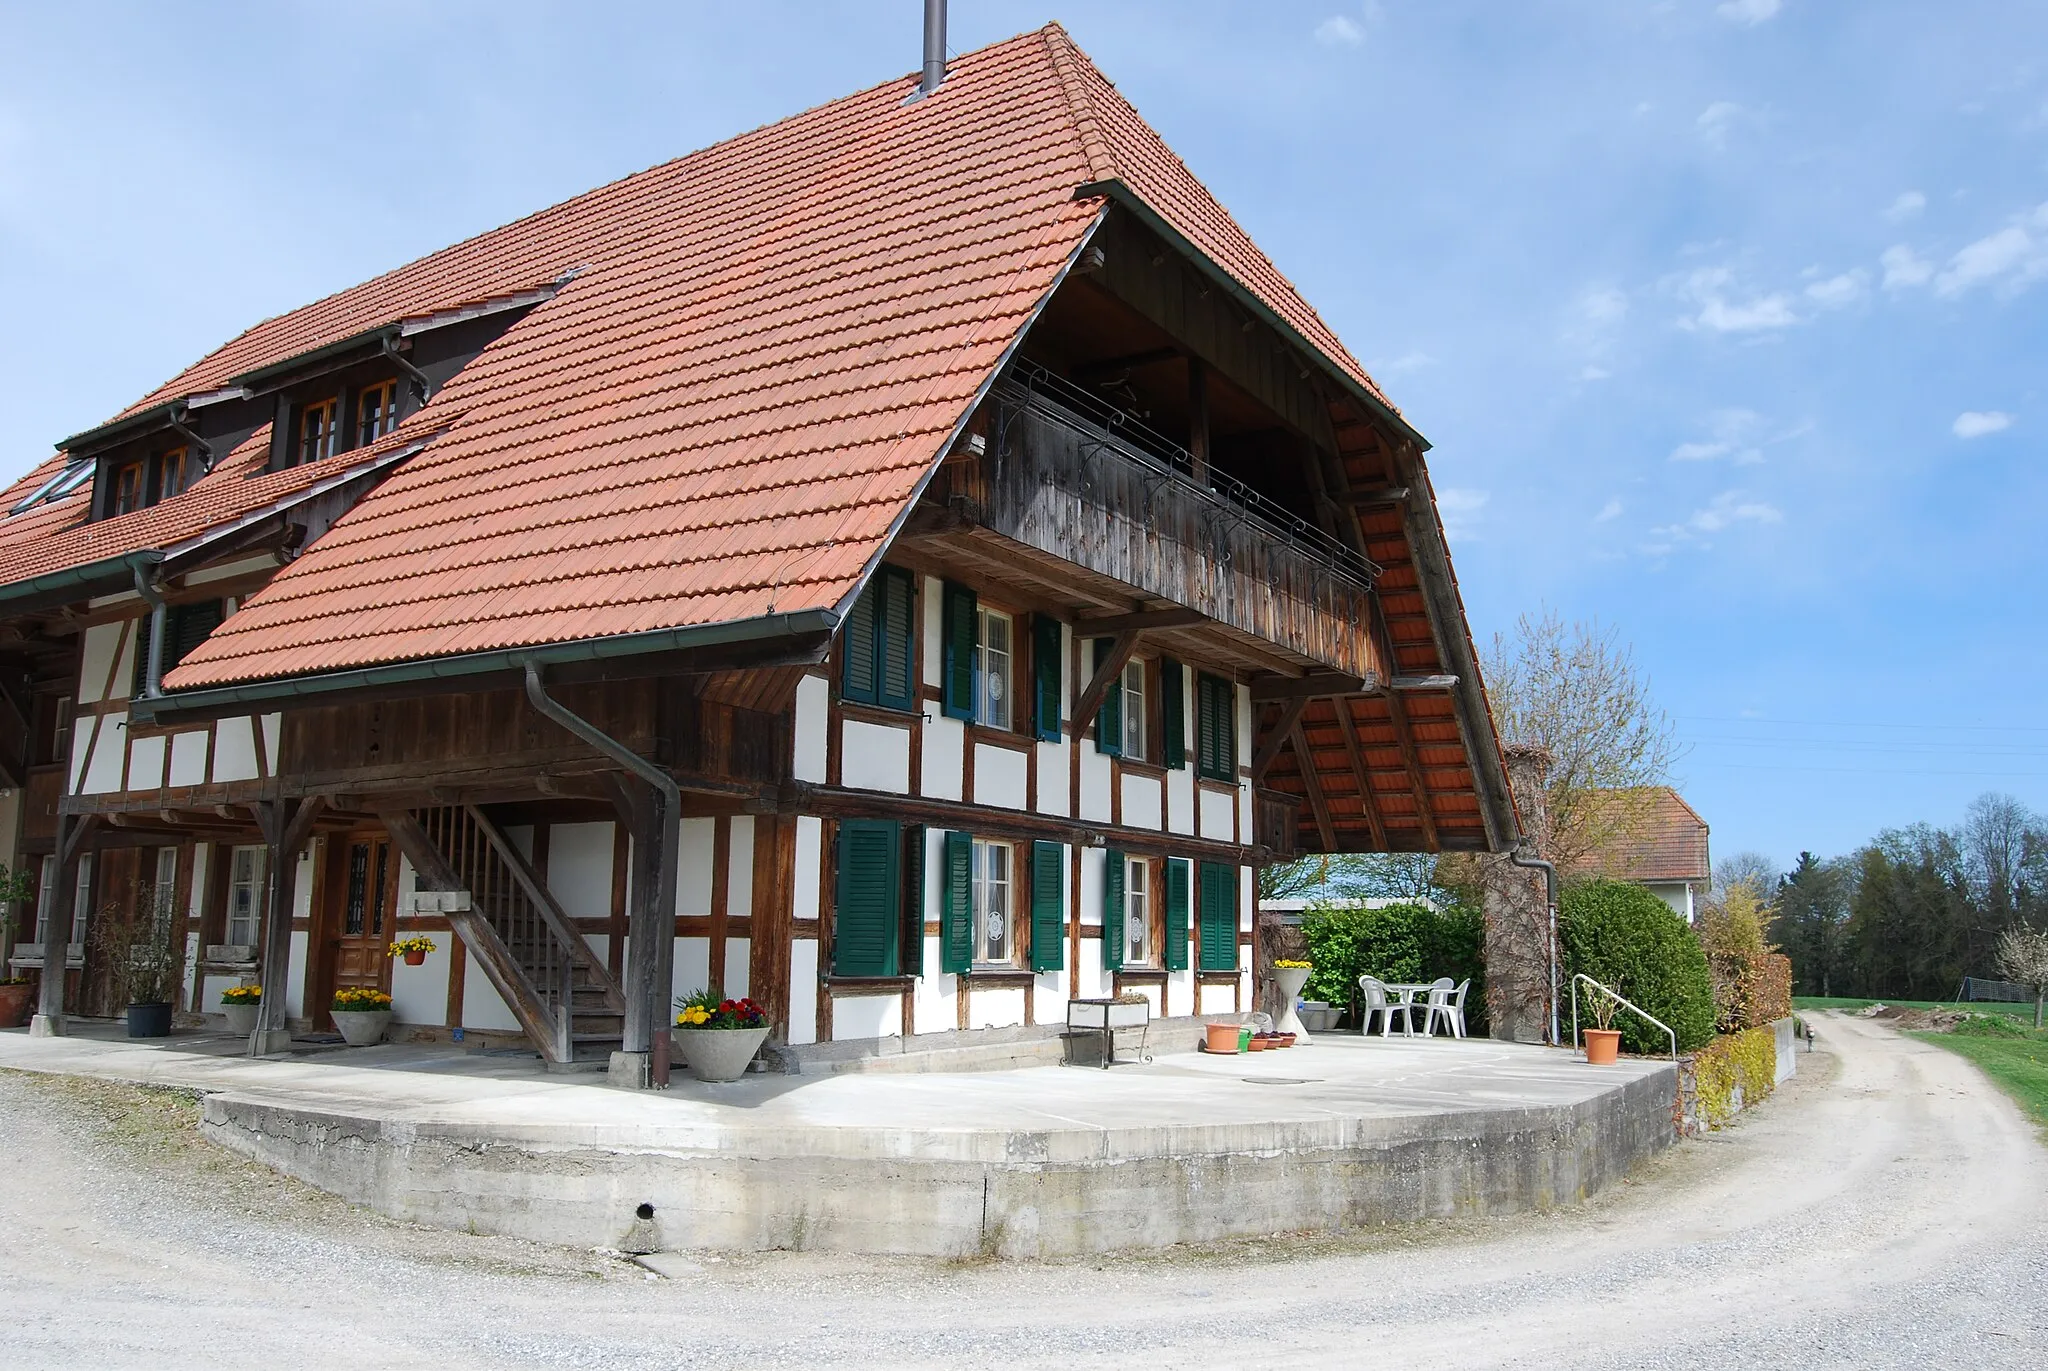 Photo showing: Timber framing house at Kriechenwil, canton of Bern, Switzerland